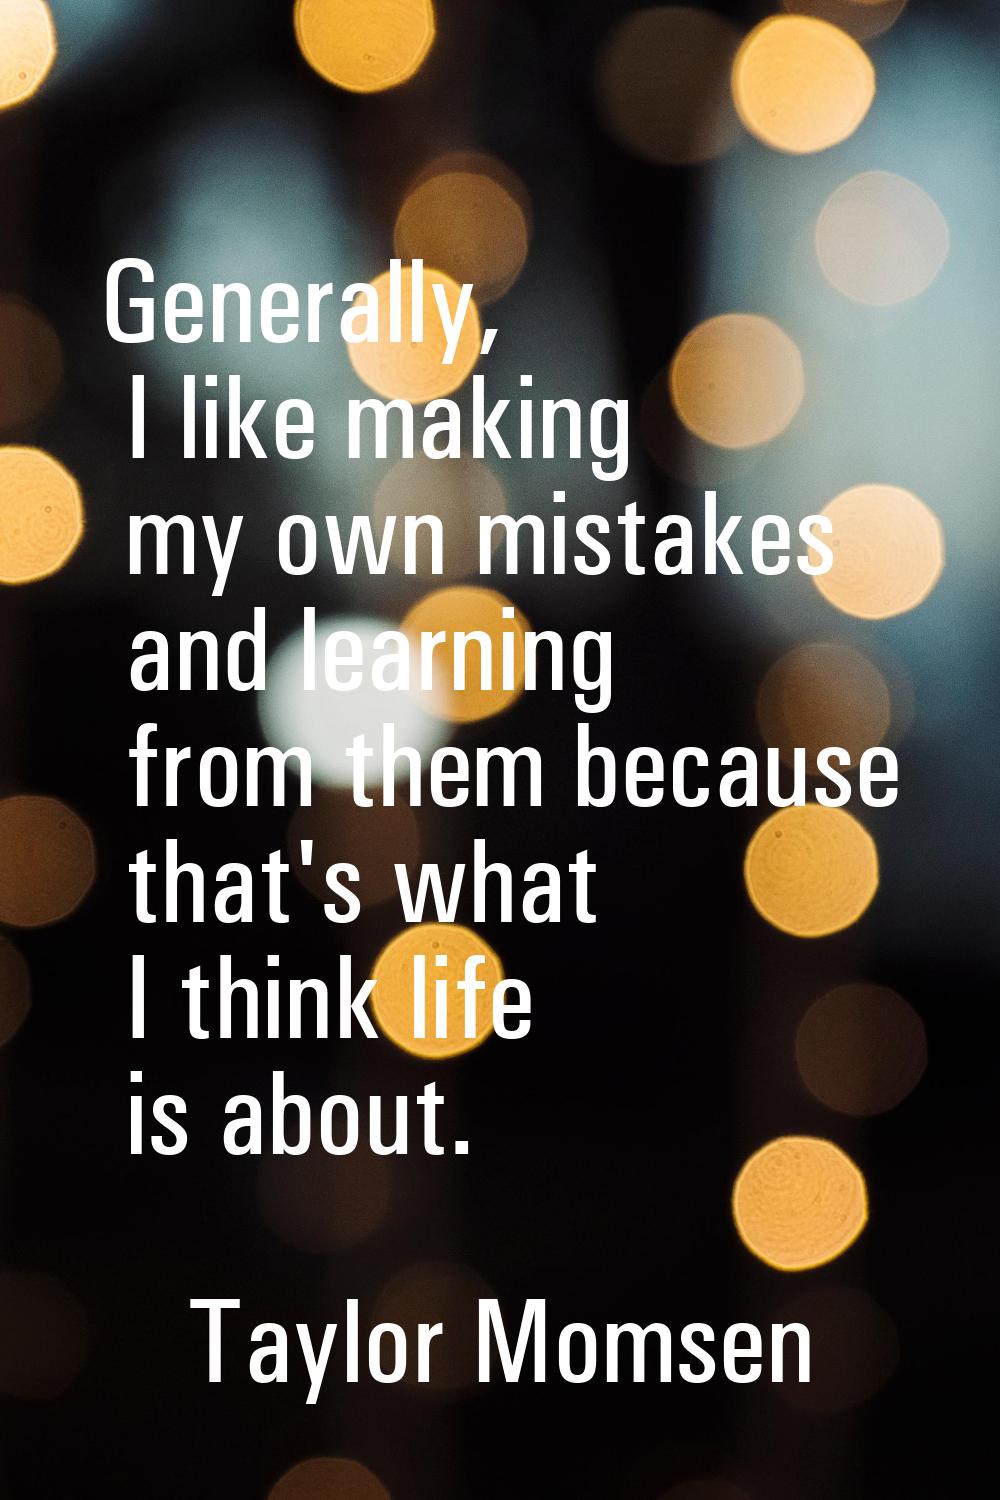 Generally, I like making my own mistakes and learning from them because that's what I think life is